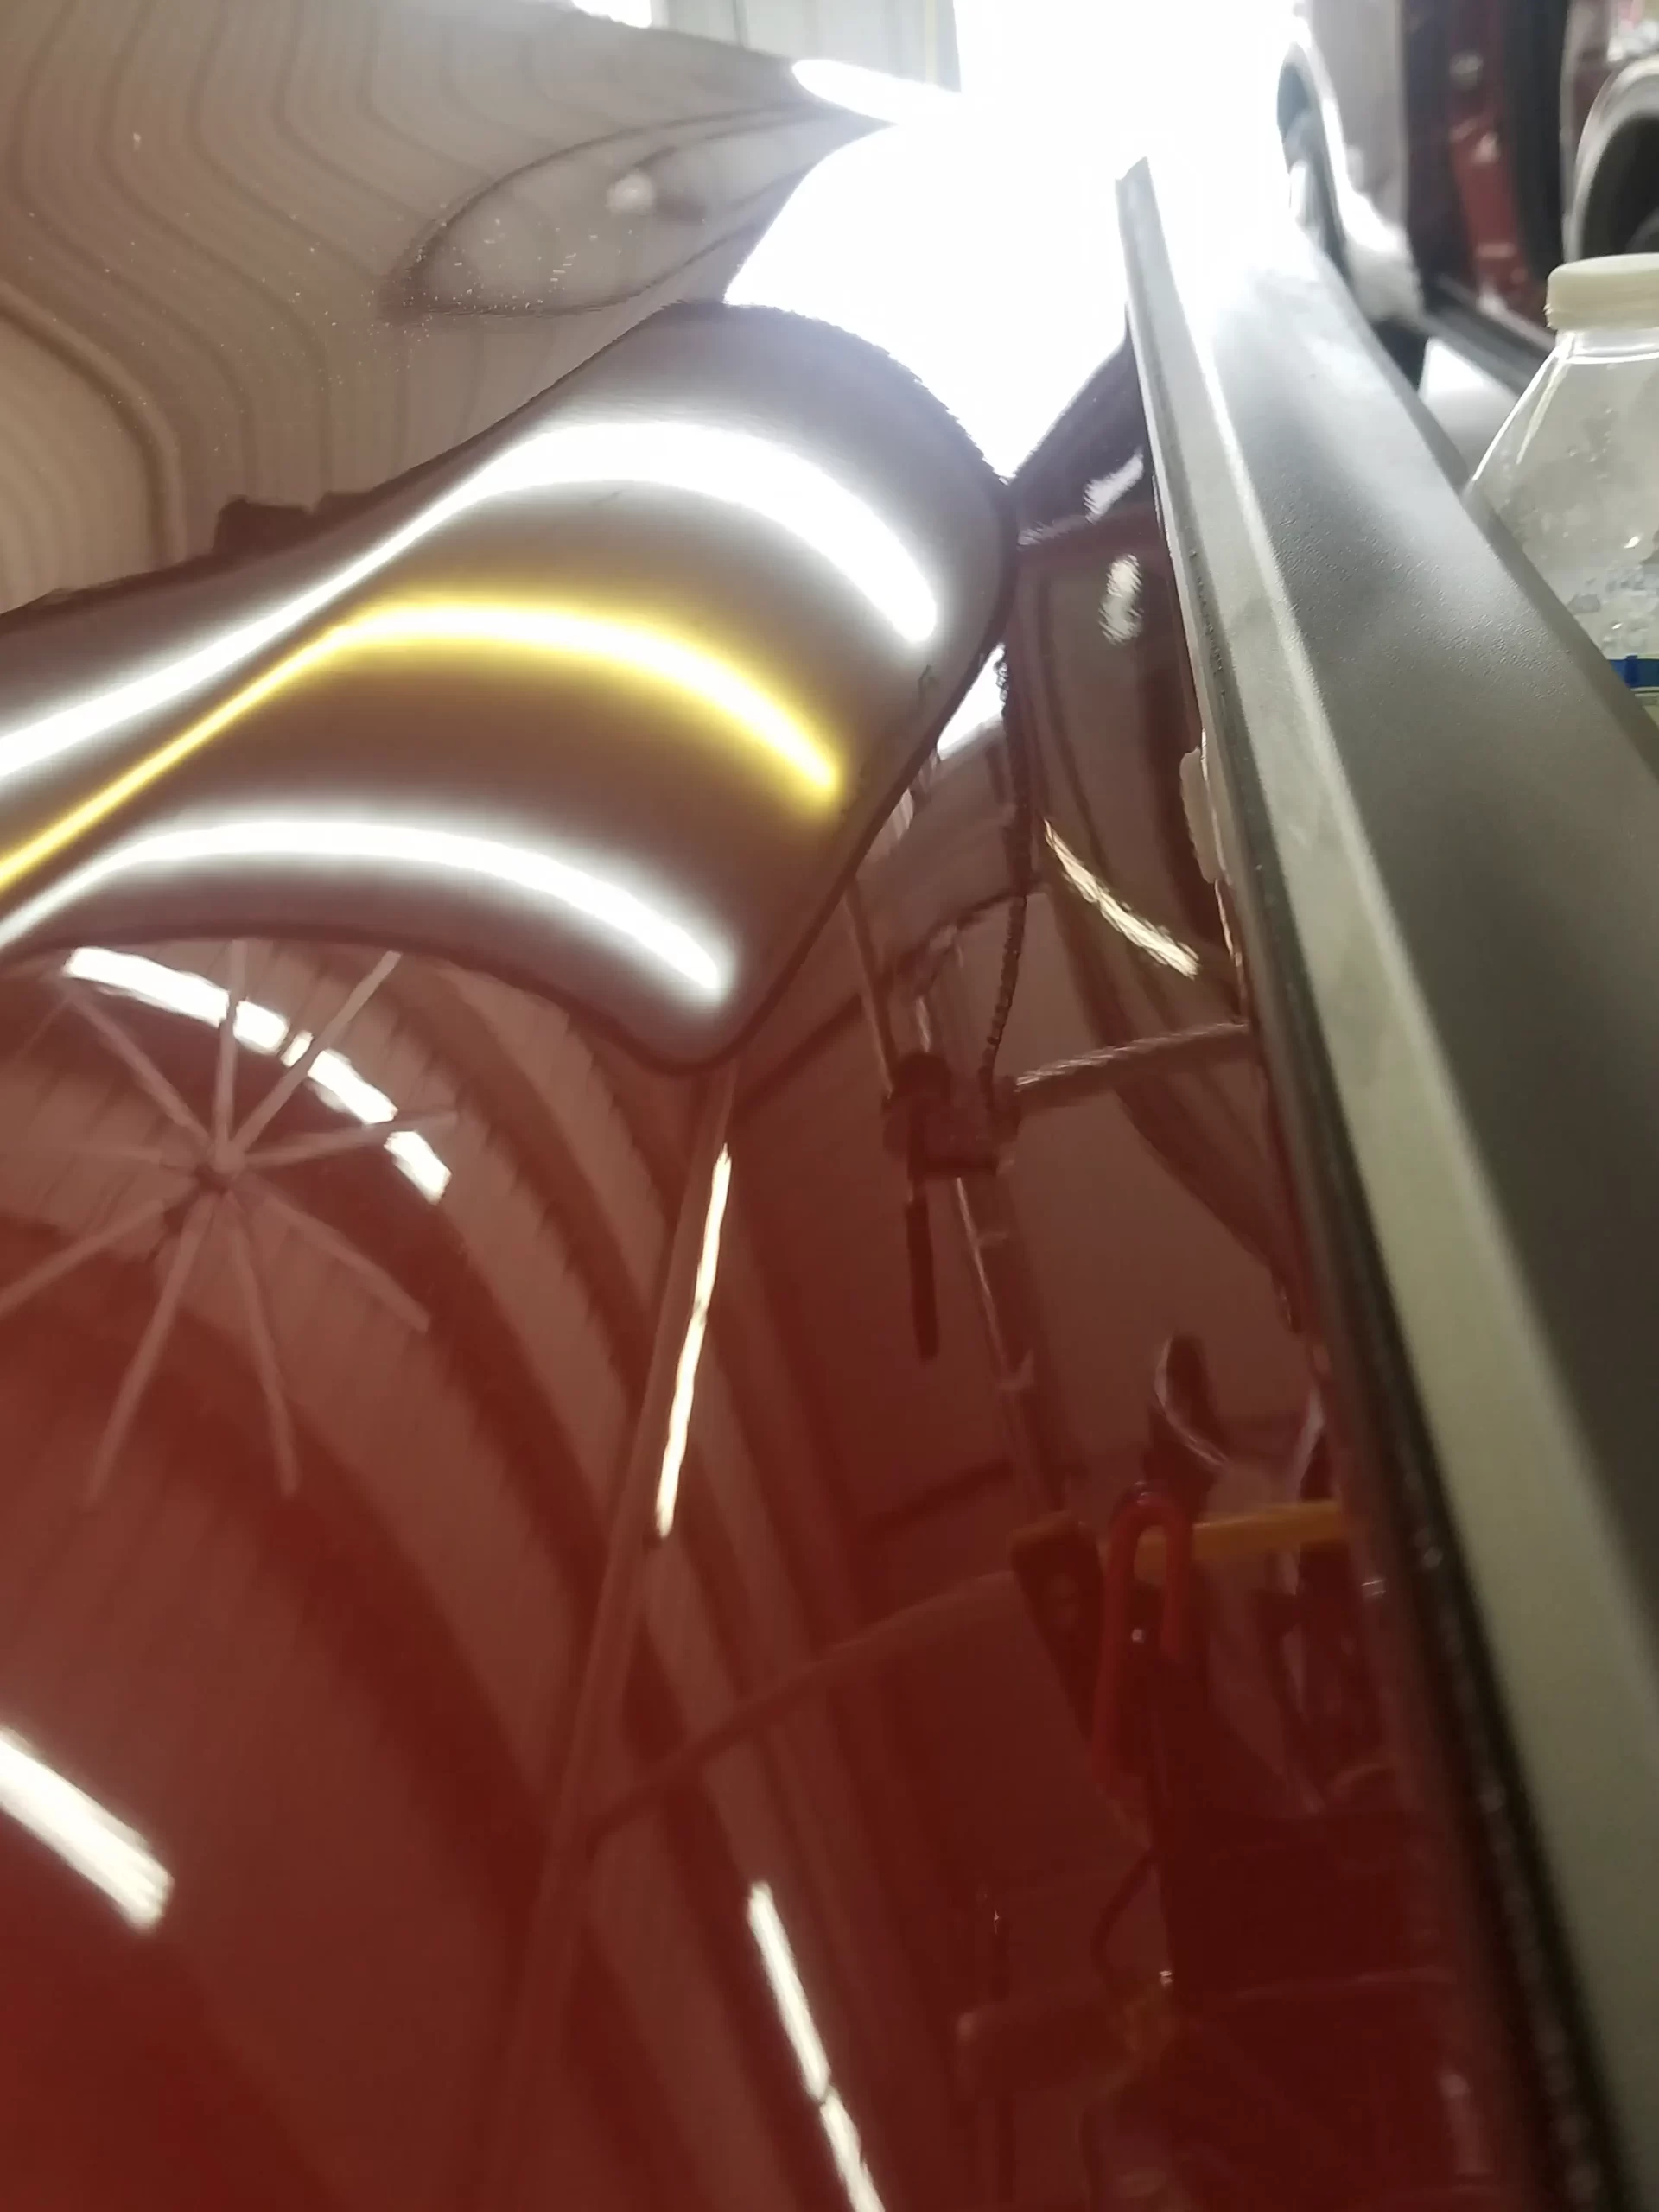 The shiny surface of a cherry red vehicle in a garage after repairs.